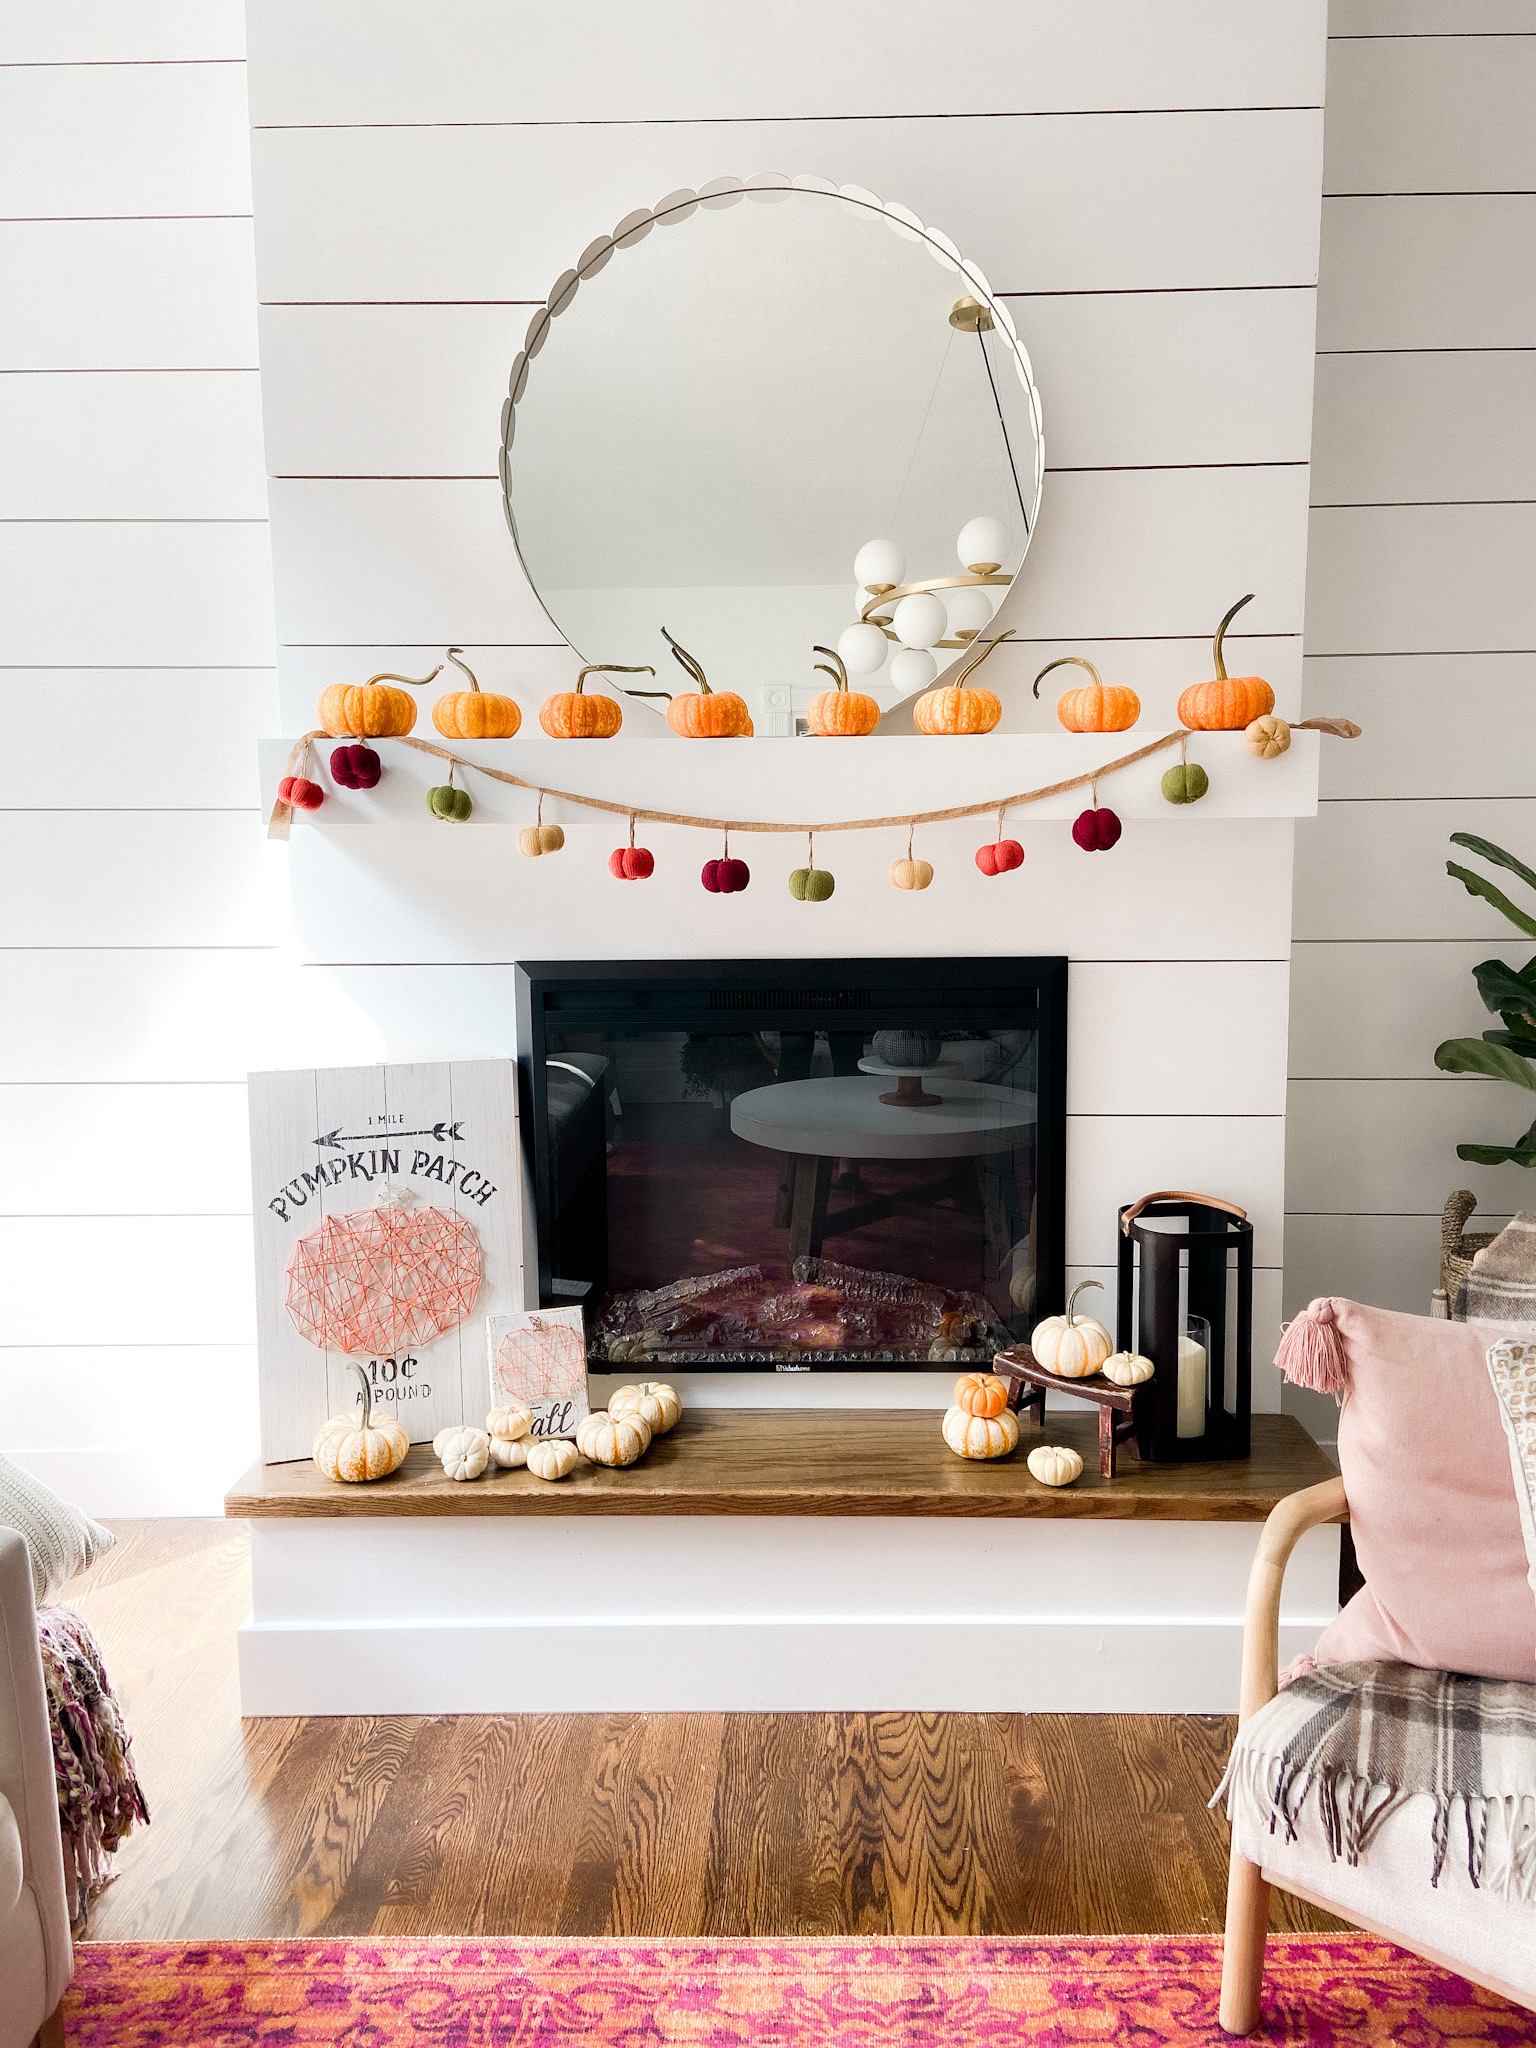 Boho Cottage Colorful Fall Home Tour. Bring warm and cozy vibes into your home for fall with these easy fall decorating ideas for your porch, entryway, kitchen, family room and stairs. 